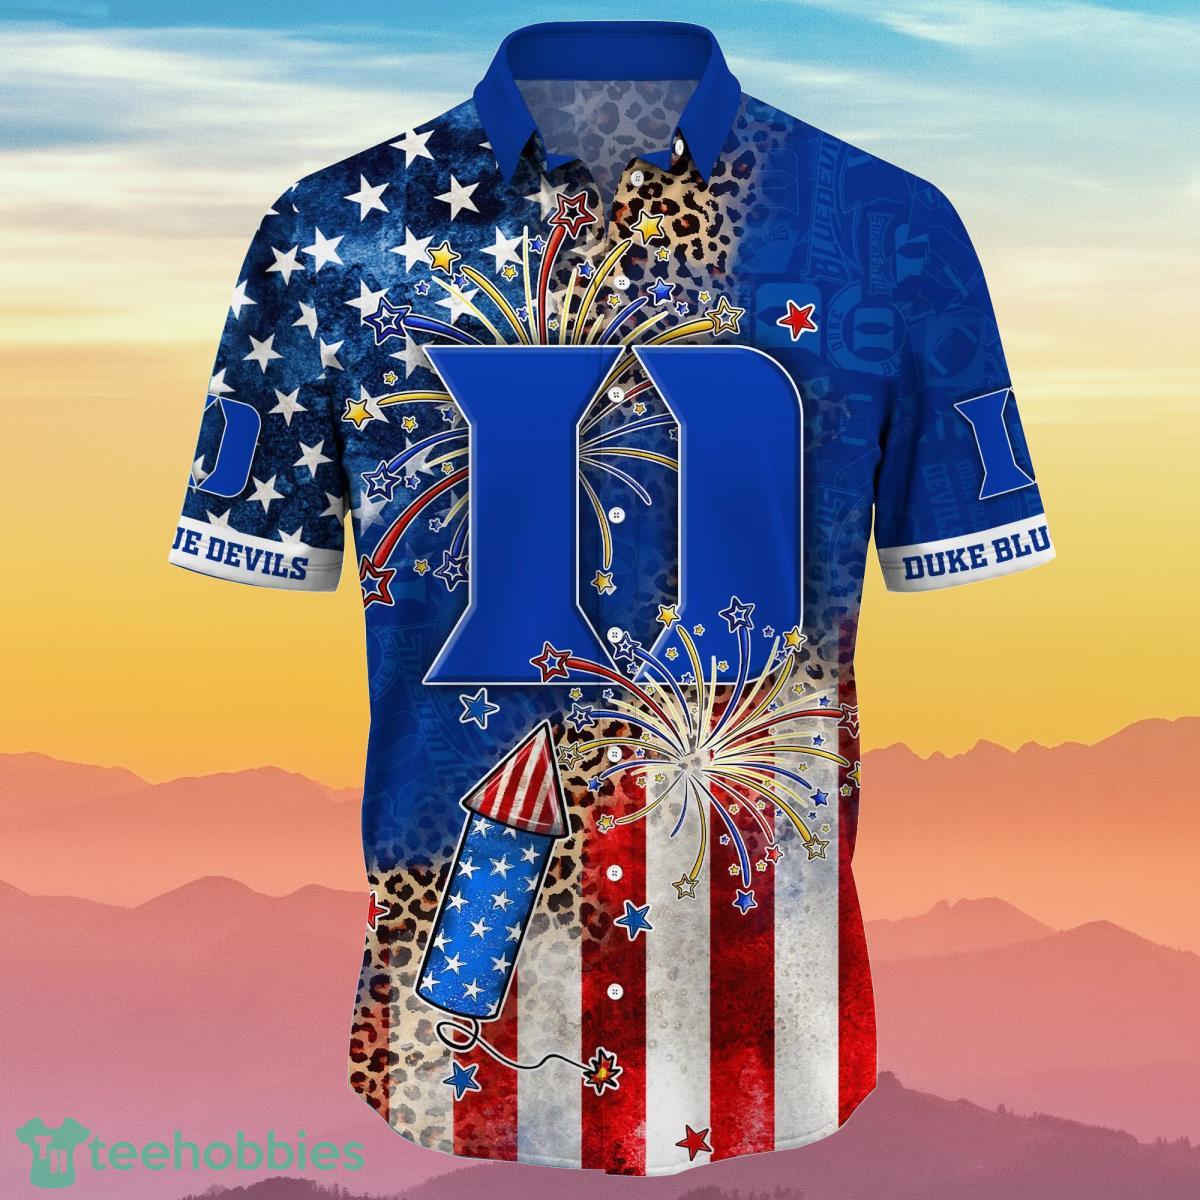 Duke Blue Devils NCAA2 Hawaiian Shirt 4th Of July Independence Day Ideal Gift For Men And Women Fans - Duke Blue Devils NCAA2 Hawaii Shirt Independence Day, Summer Shirts NA49889_3